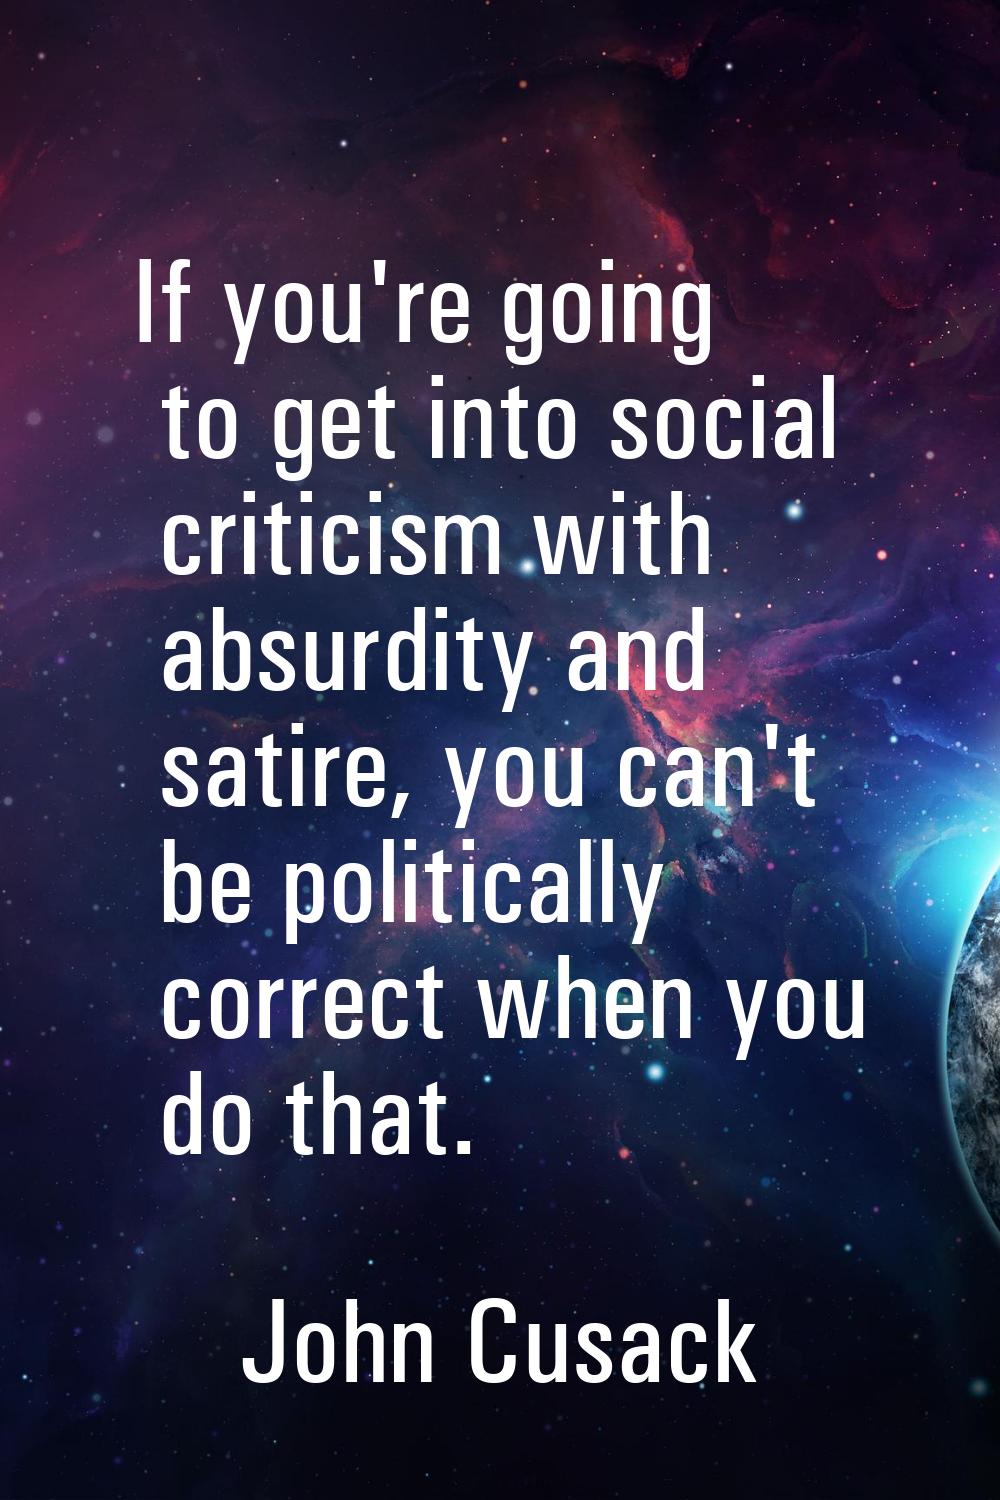 If you're going to get into social criticism with absurdity and satire, you can't be politically co